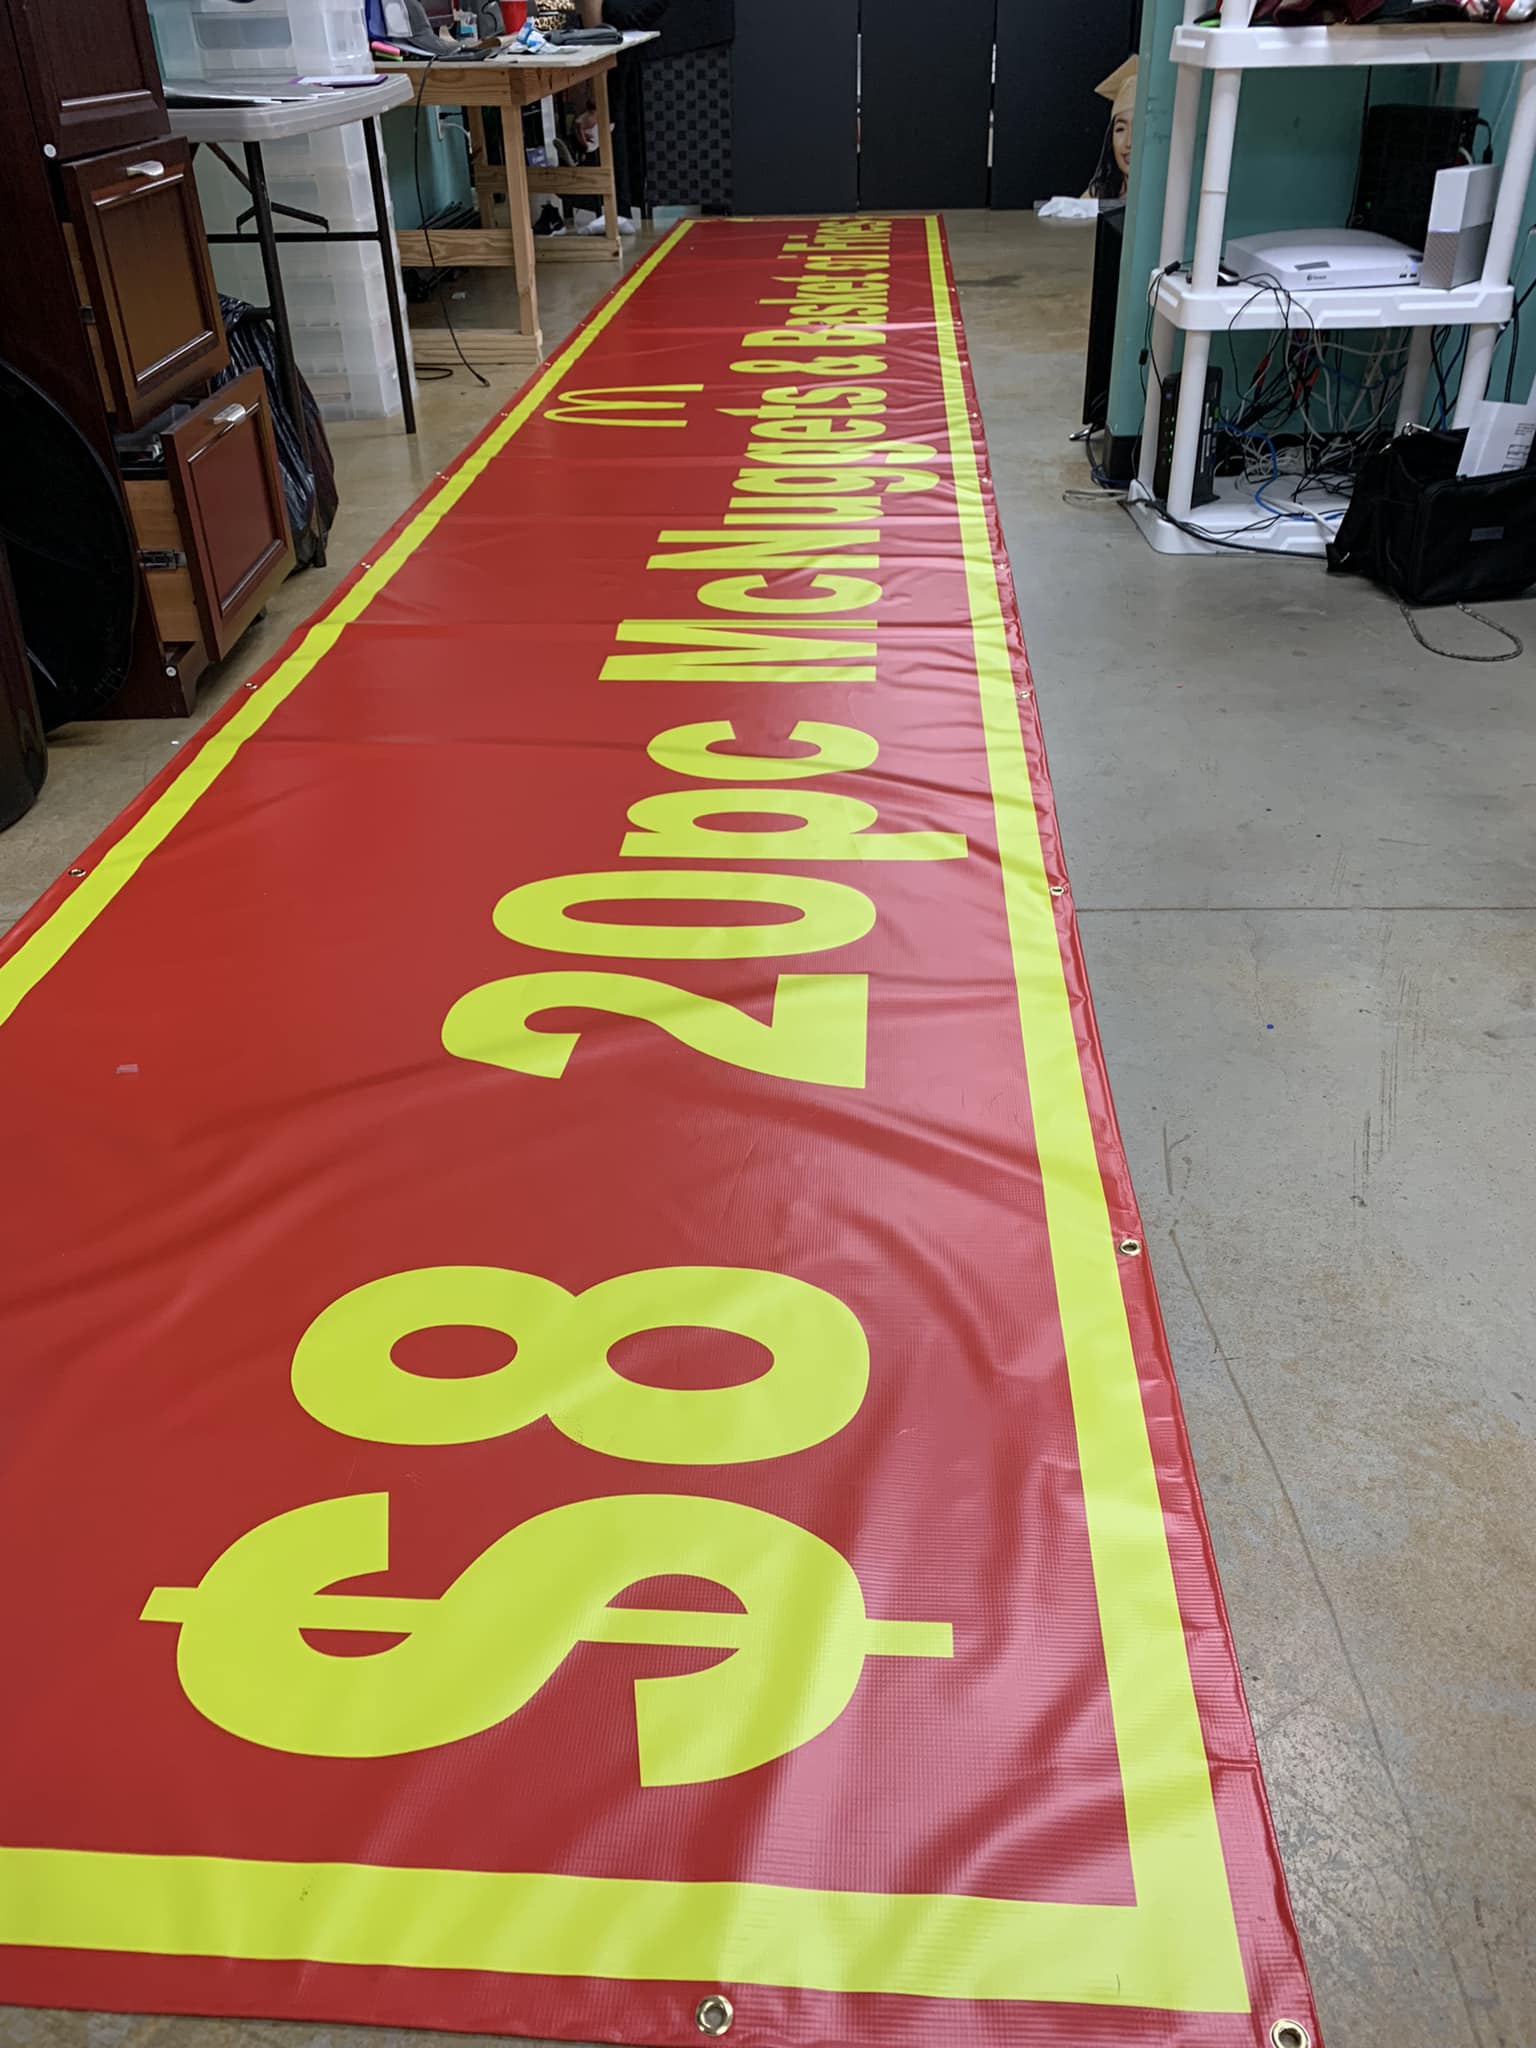 Vibrant custom banners displayed at an outdoor event, showcasing colorful graphics, logos, and promotional text for businesses and special occasions.